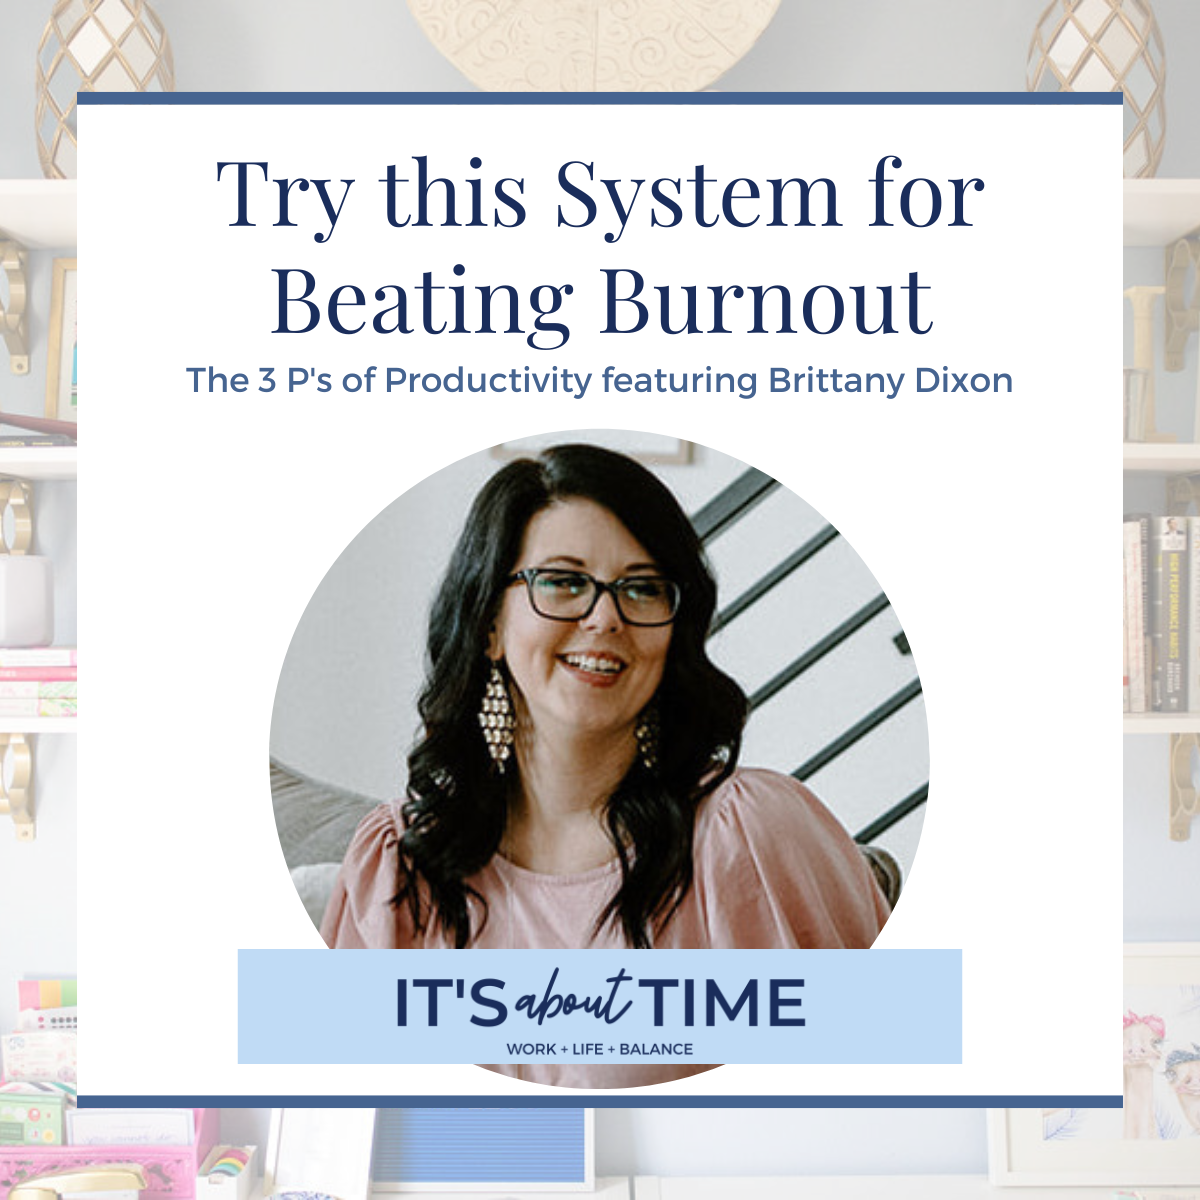 Beat Burnout with the 3 P's featuring Brittany Dixon